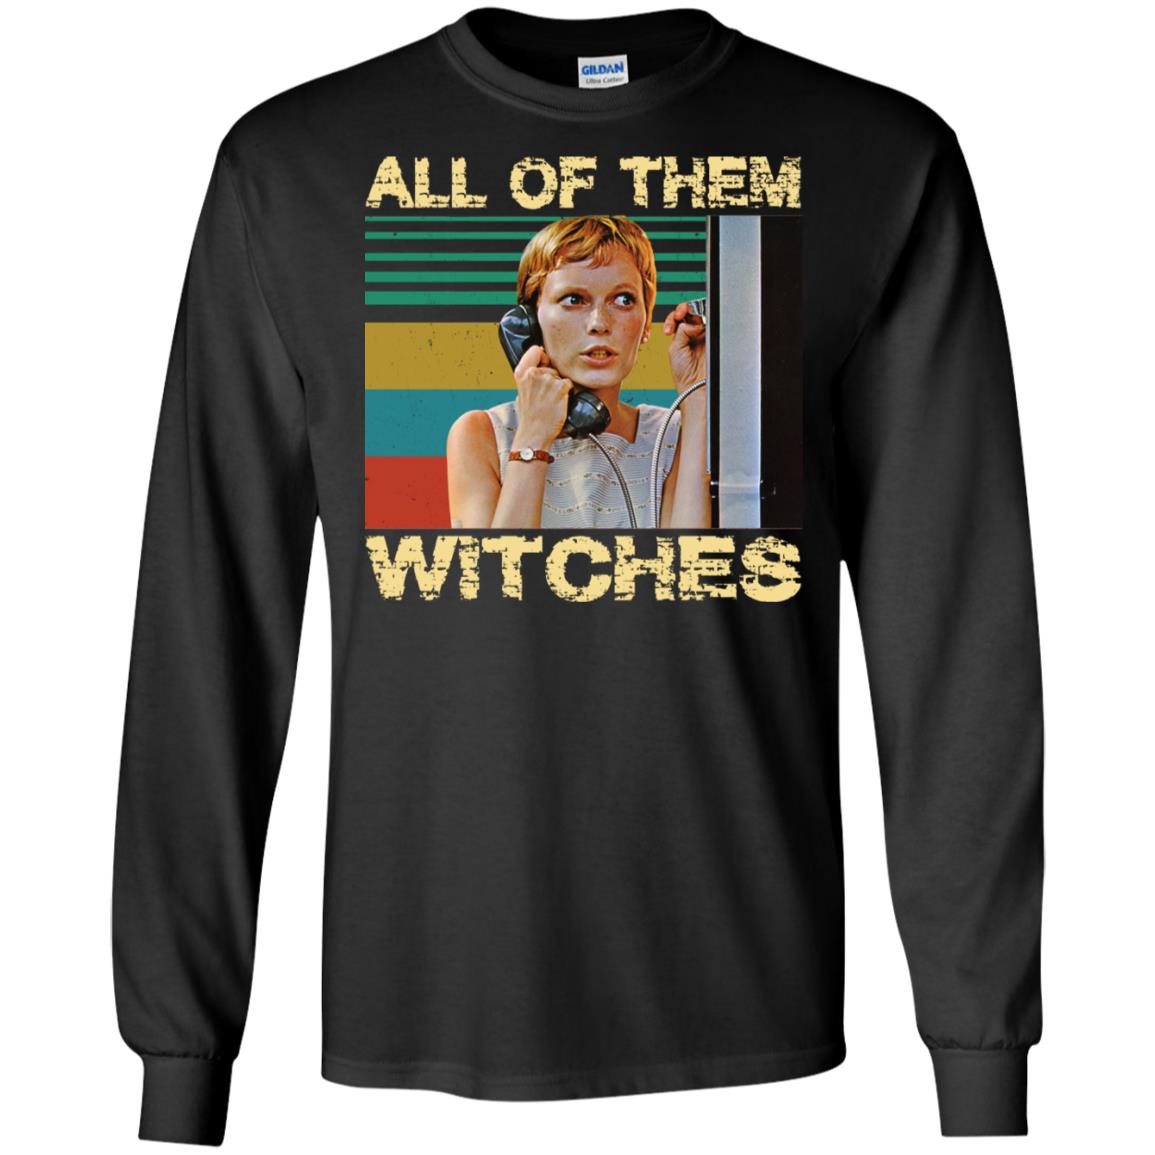 Mia Farrow - All Of Them Witches Shirt, Hoodie, Tank | Teemoonley.com